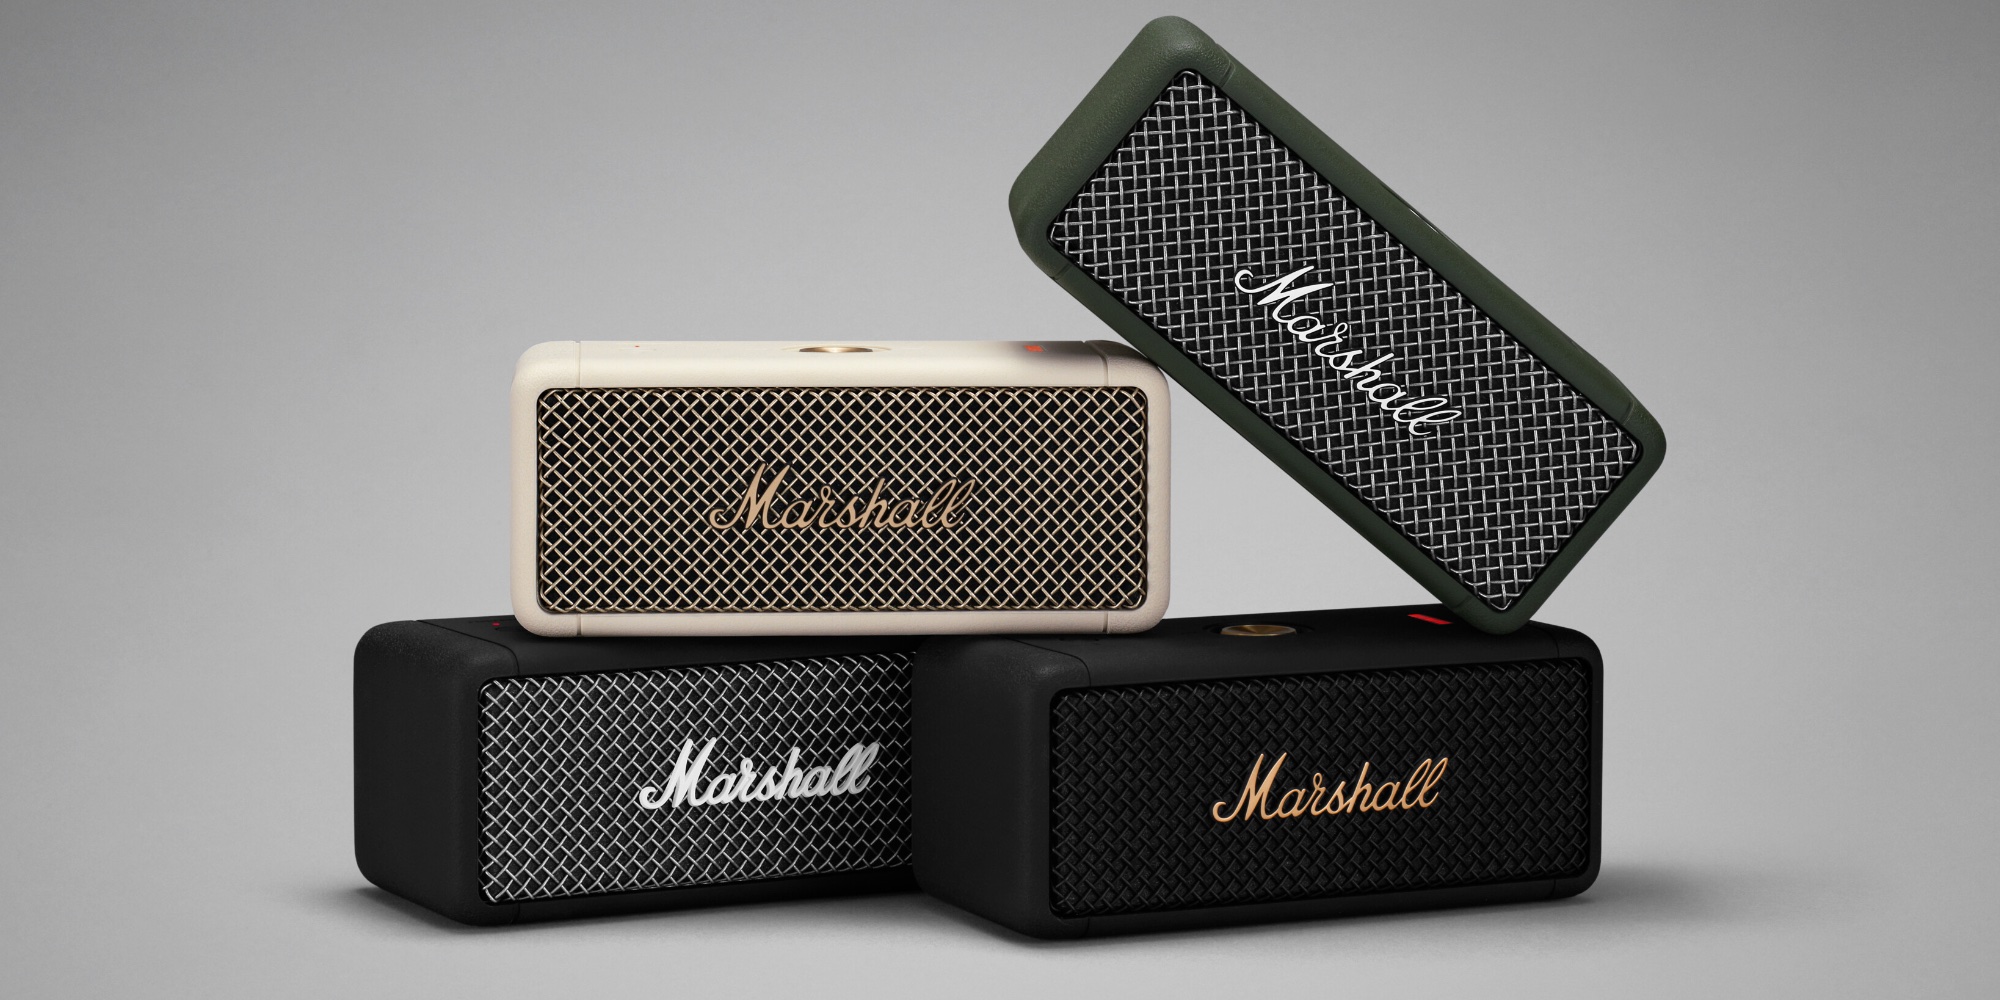 Marshall Emberton cream and forest colorways announced - 9to5Toys